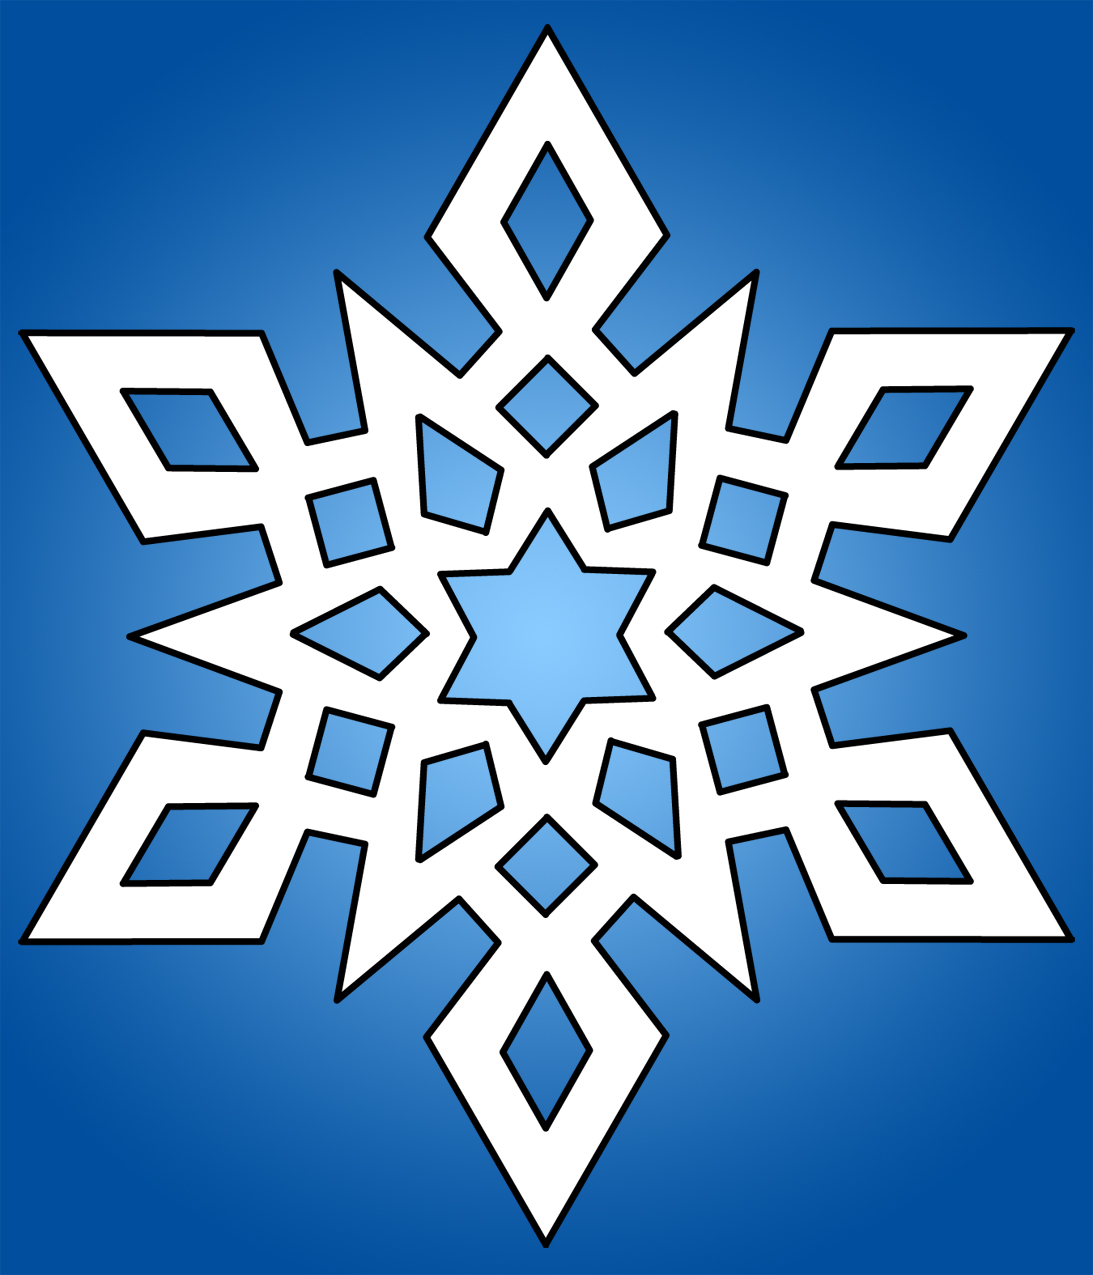 Snowflake Clip Art In Color Is One Of Our Unique Illustrations That